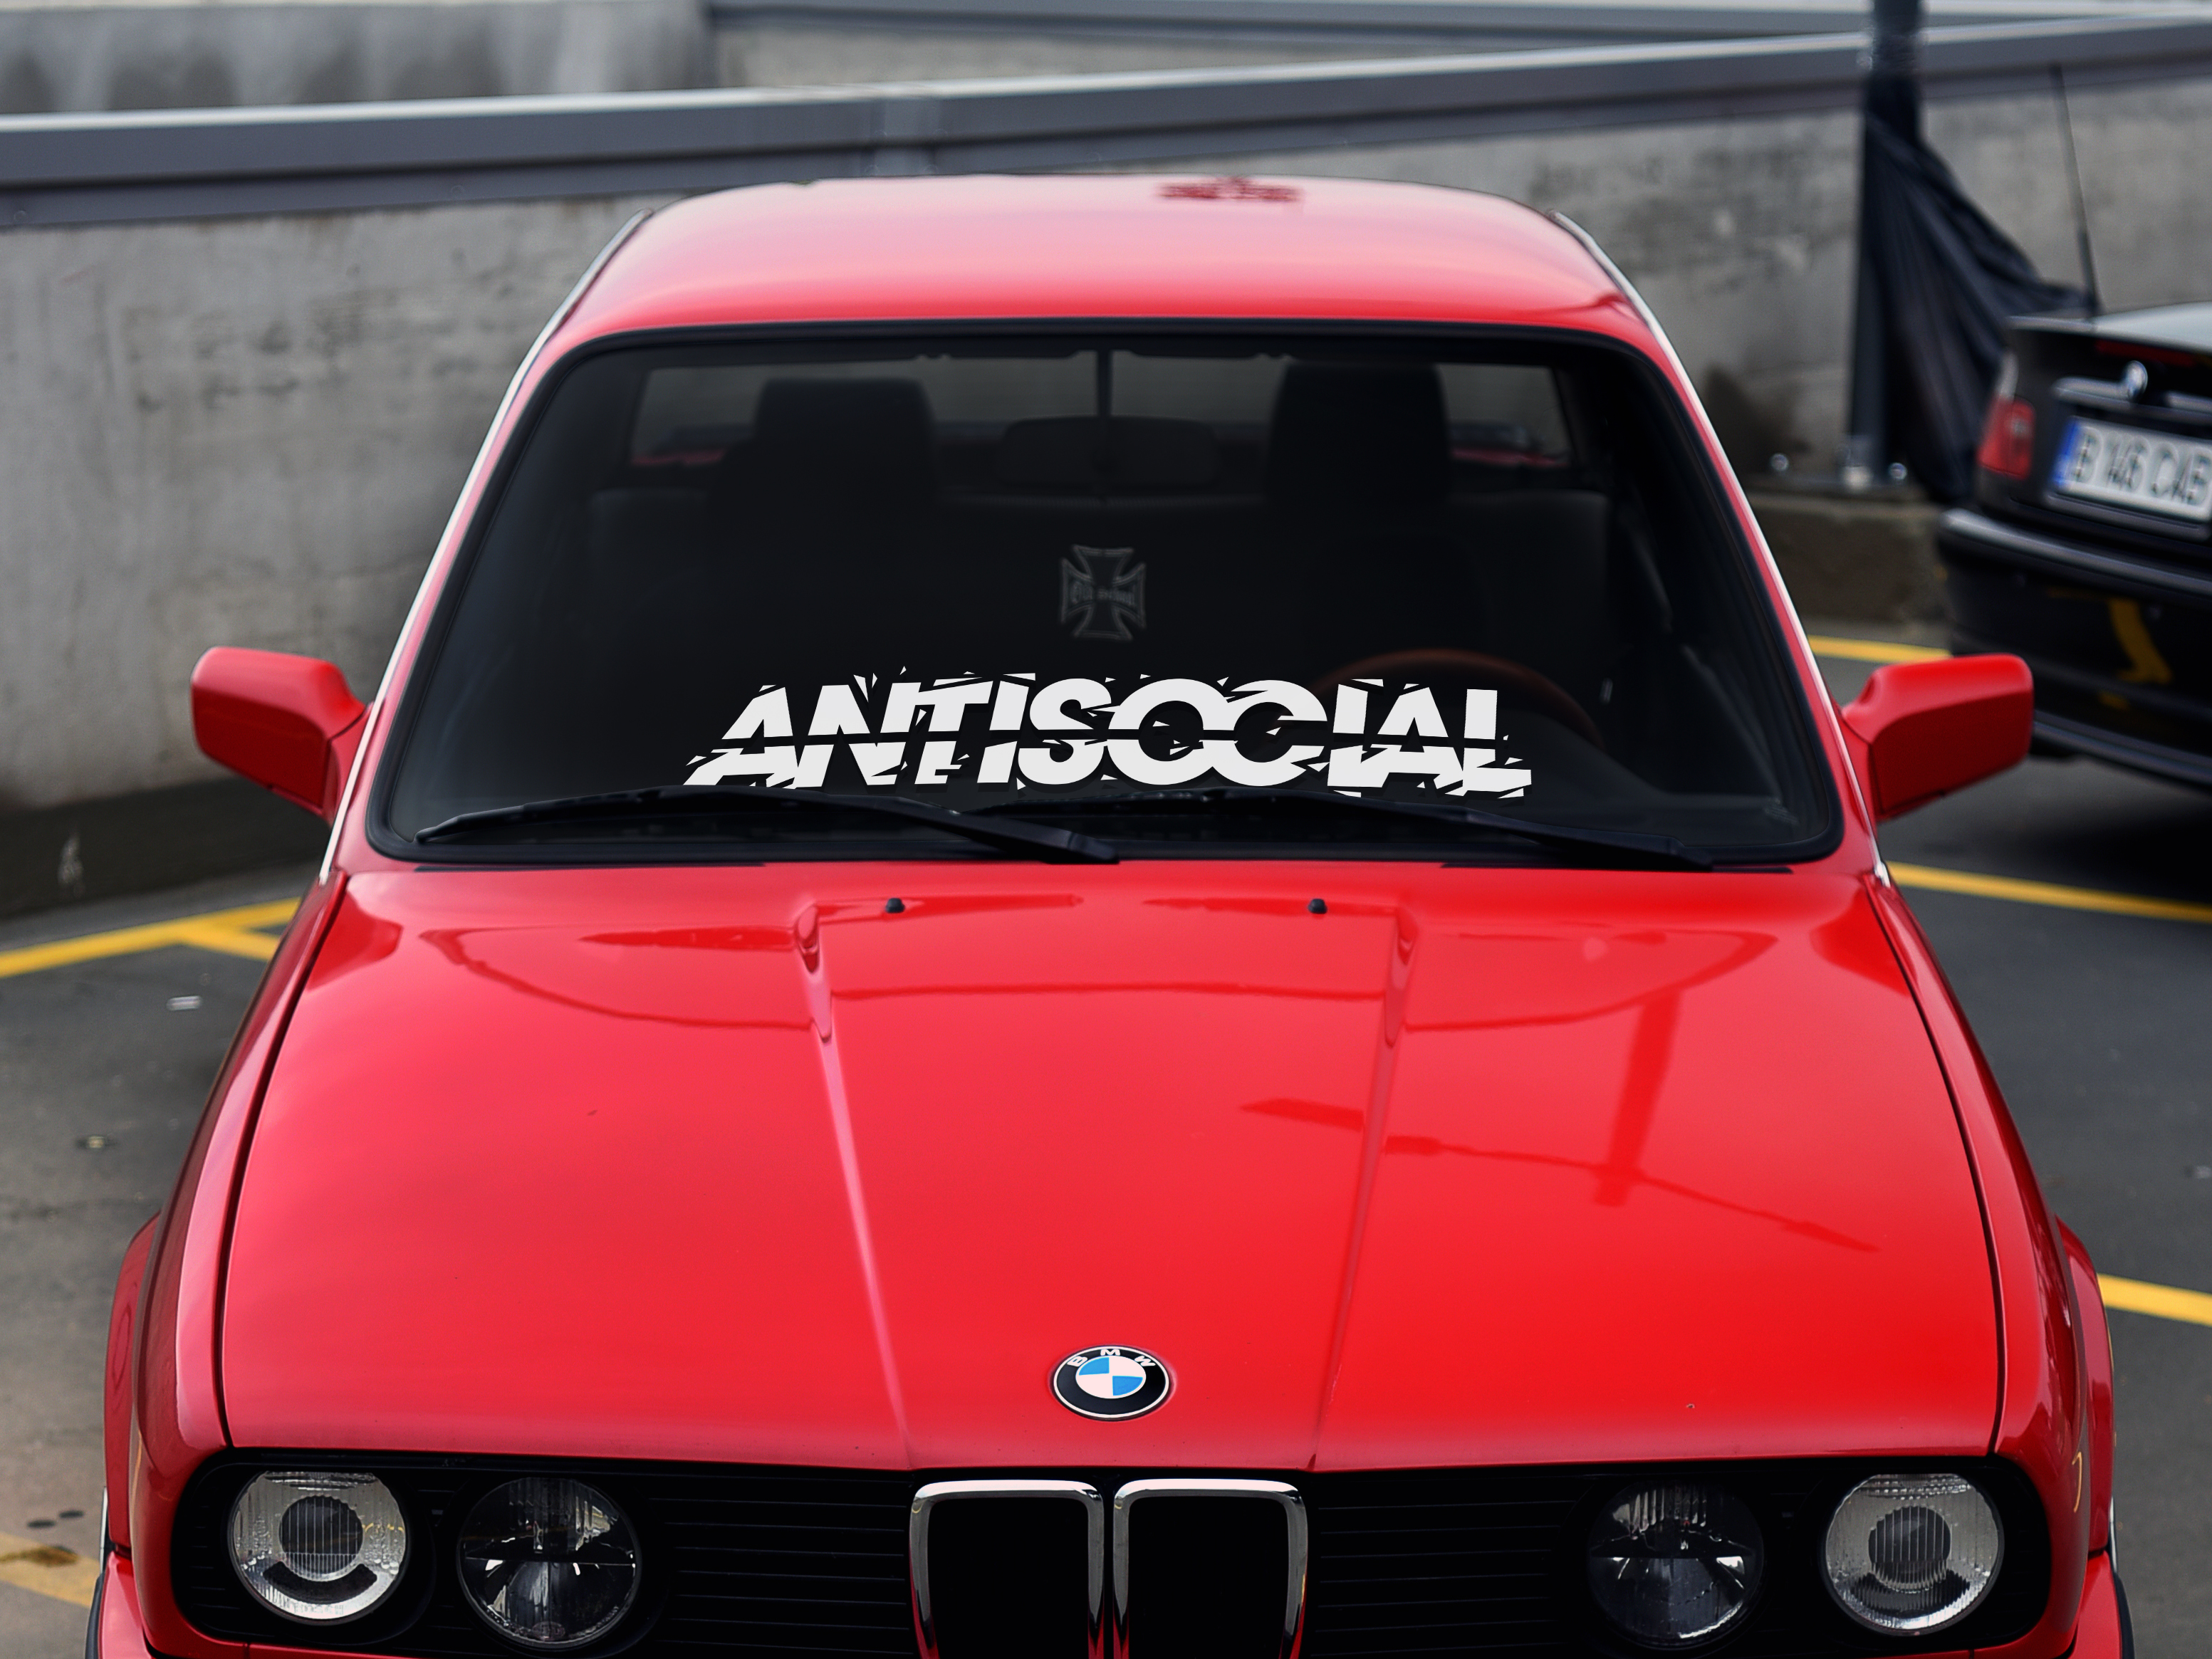 Antisocial windshield banner for cars and trucks. Aggressive style lettering with broken font falling apart in peices.